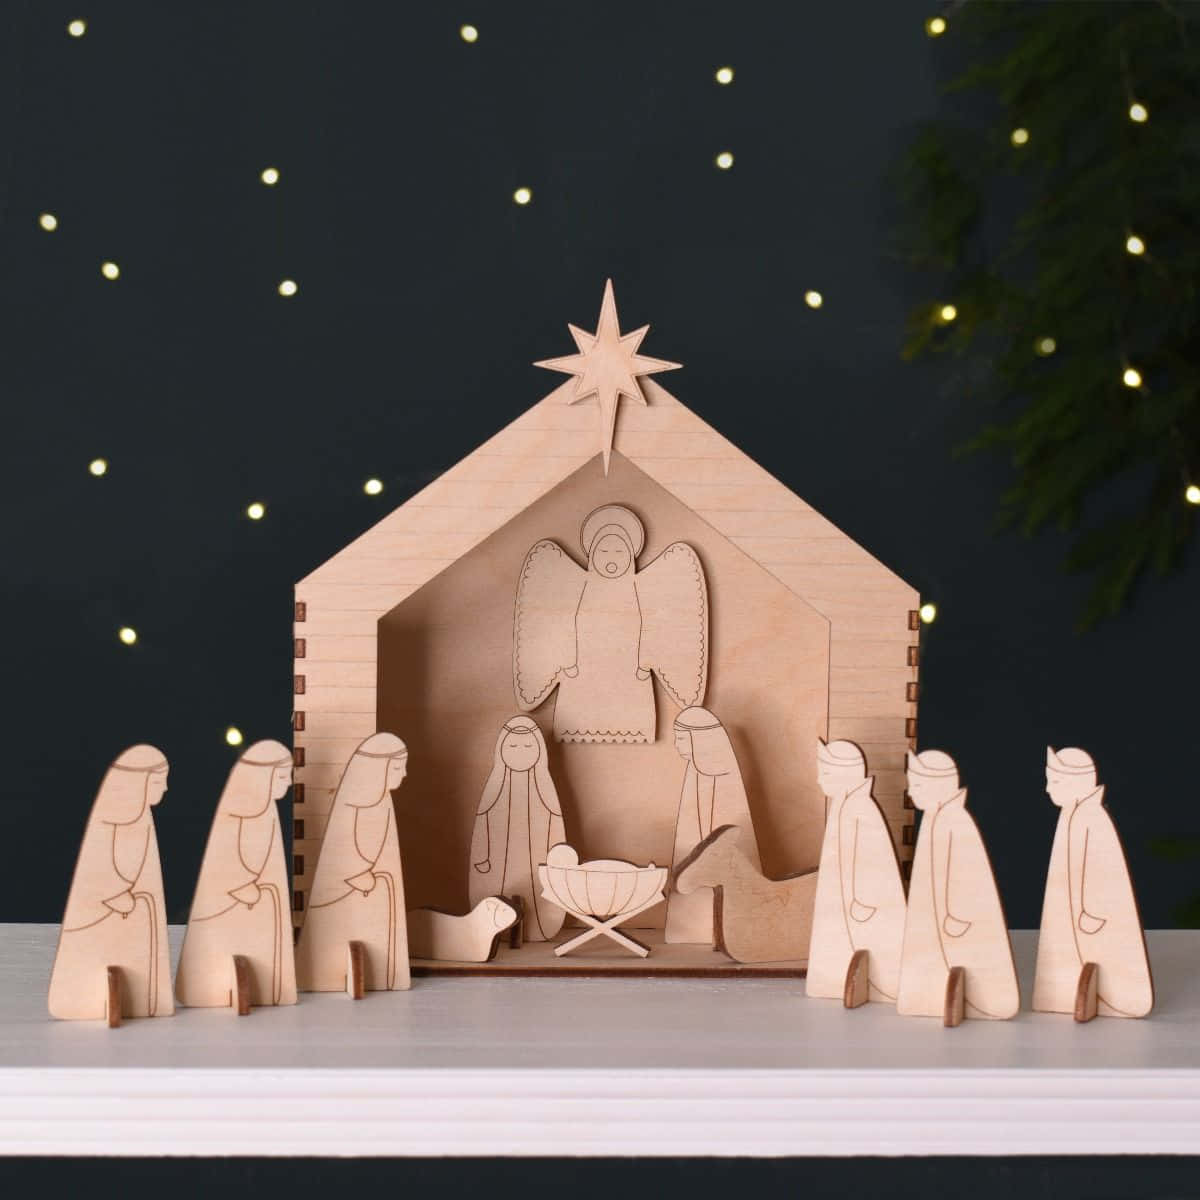 Celebrate the True Meaning of Christmas with this Beautiful Nativity Scene